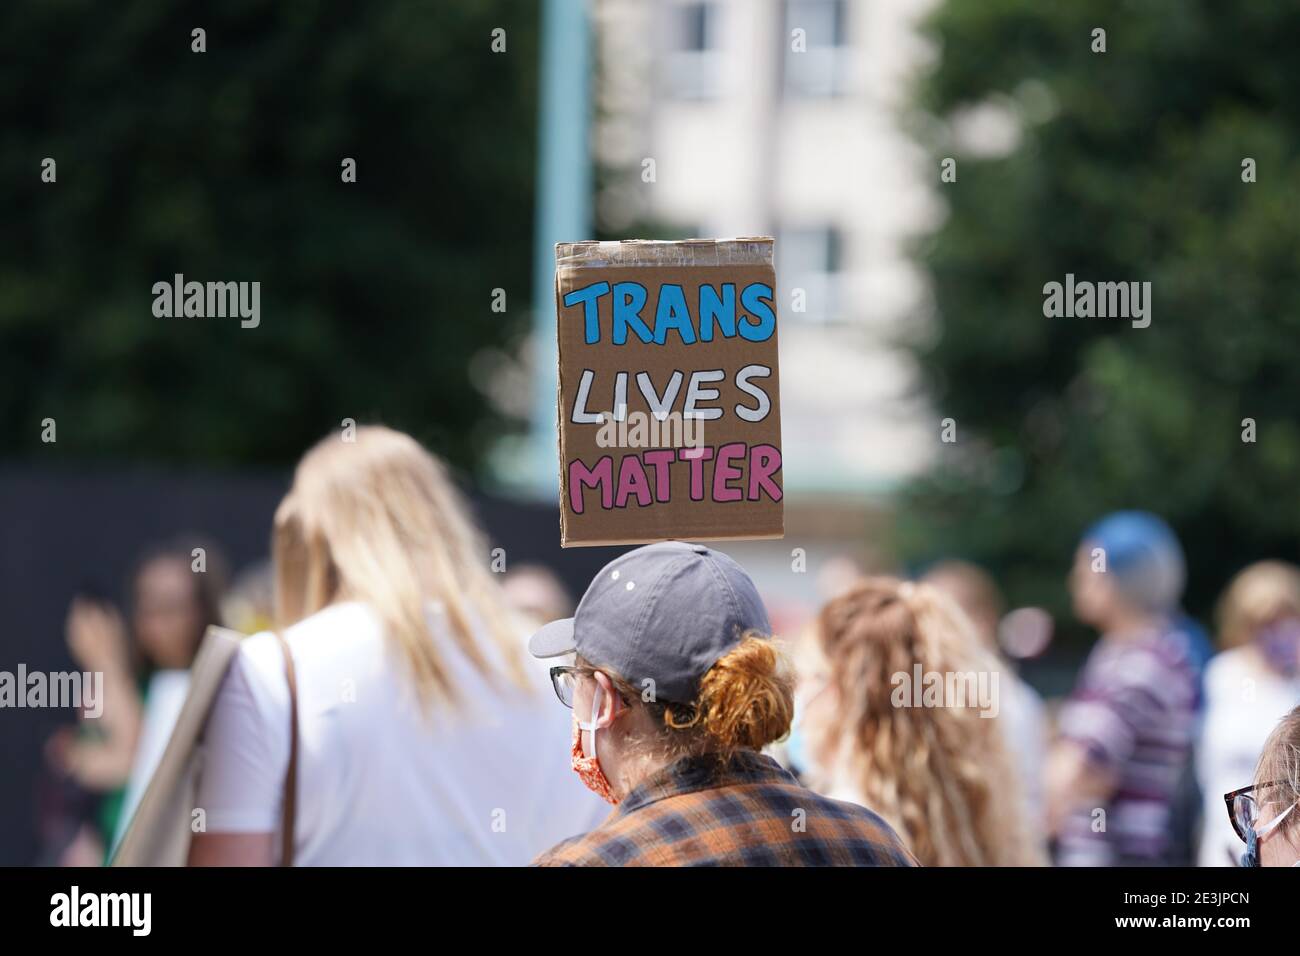 Plymouth, UK. July 18th 2020. Trans Lives Matter protest in the Civic Square, in the centre of the city. Stock Photo